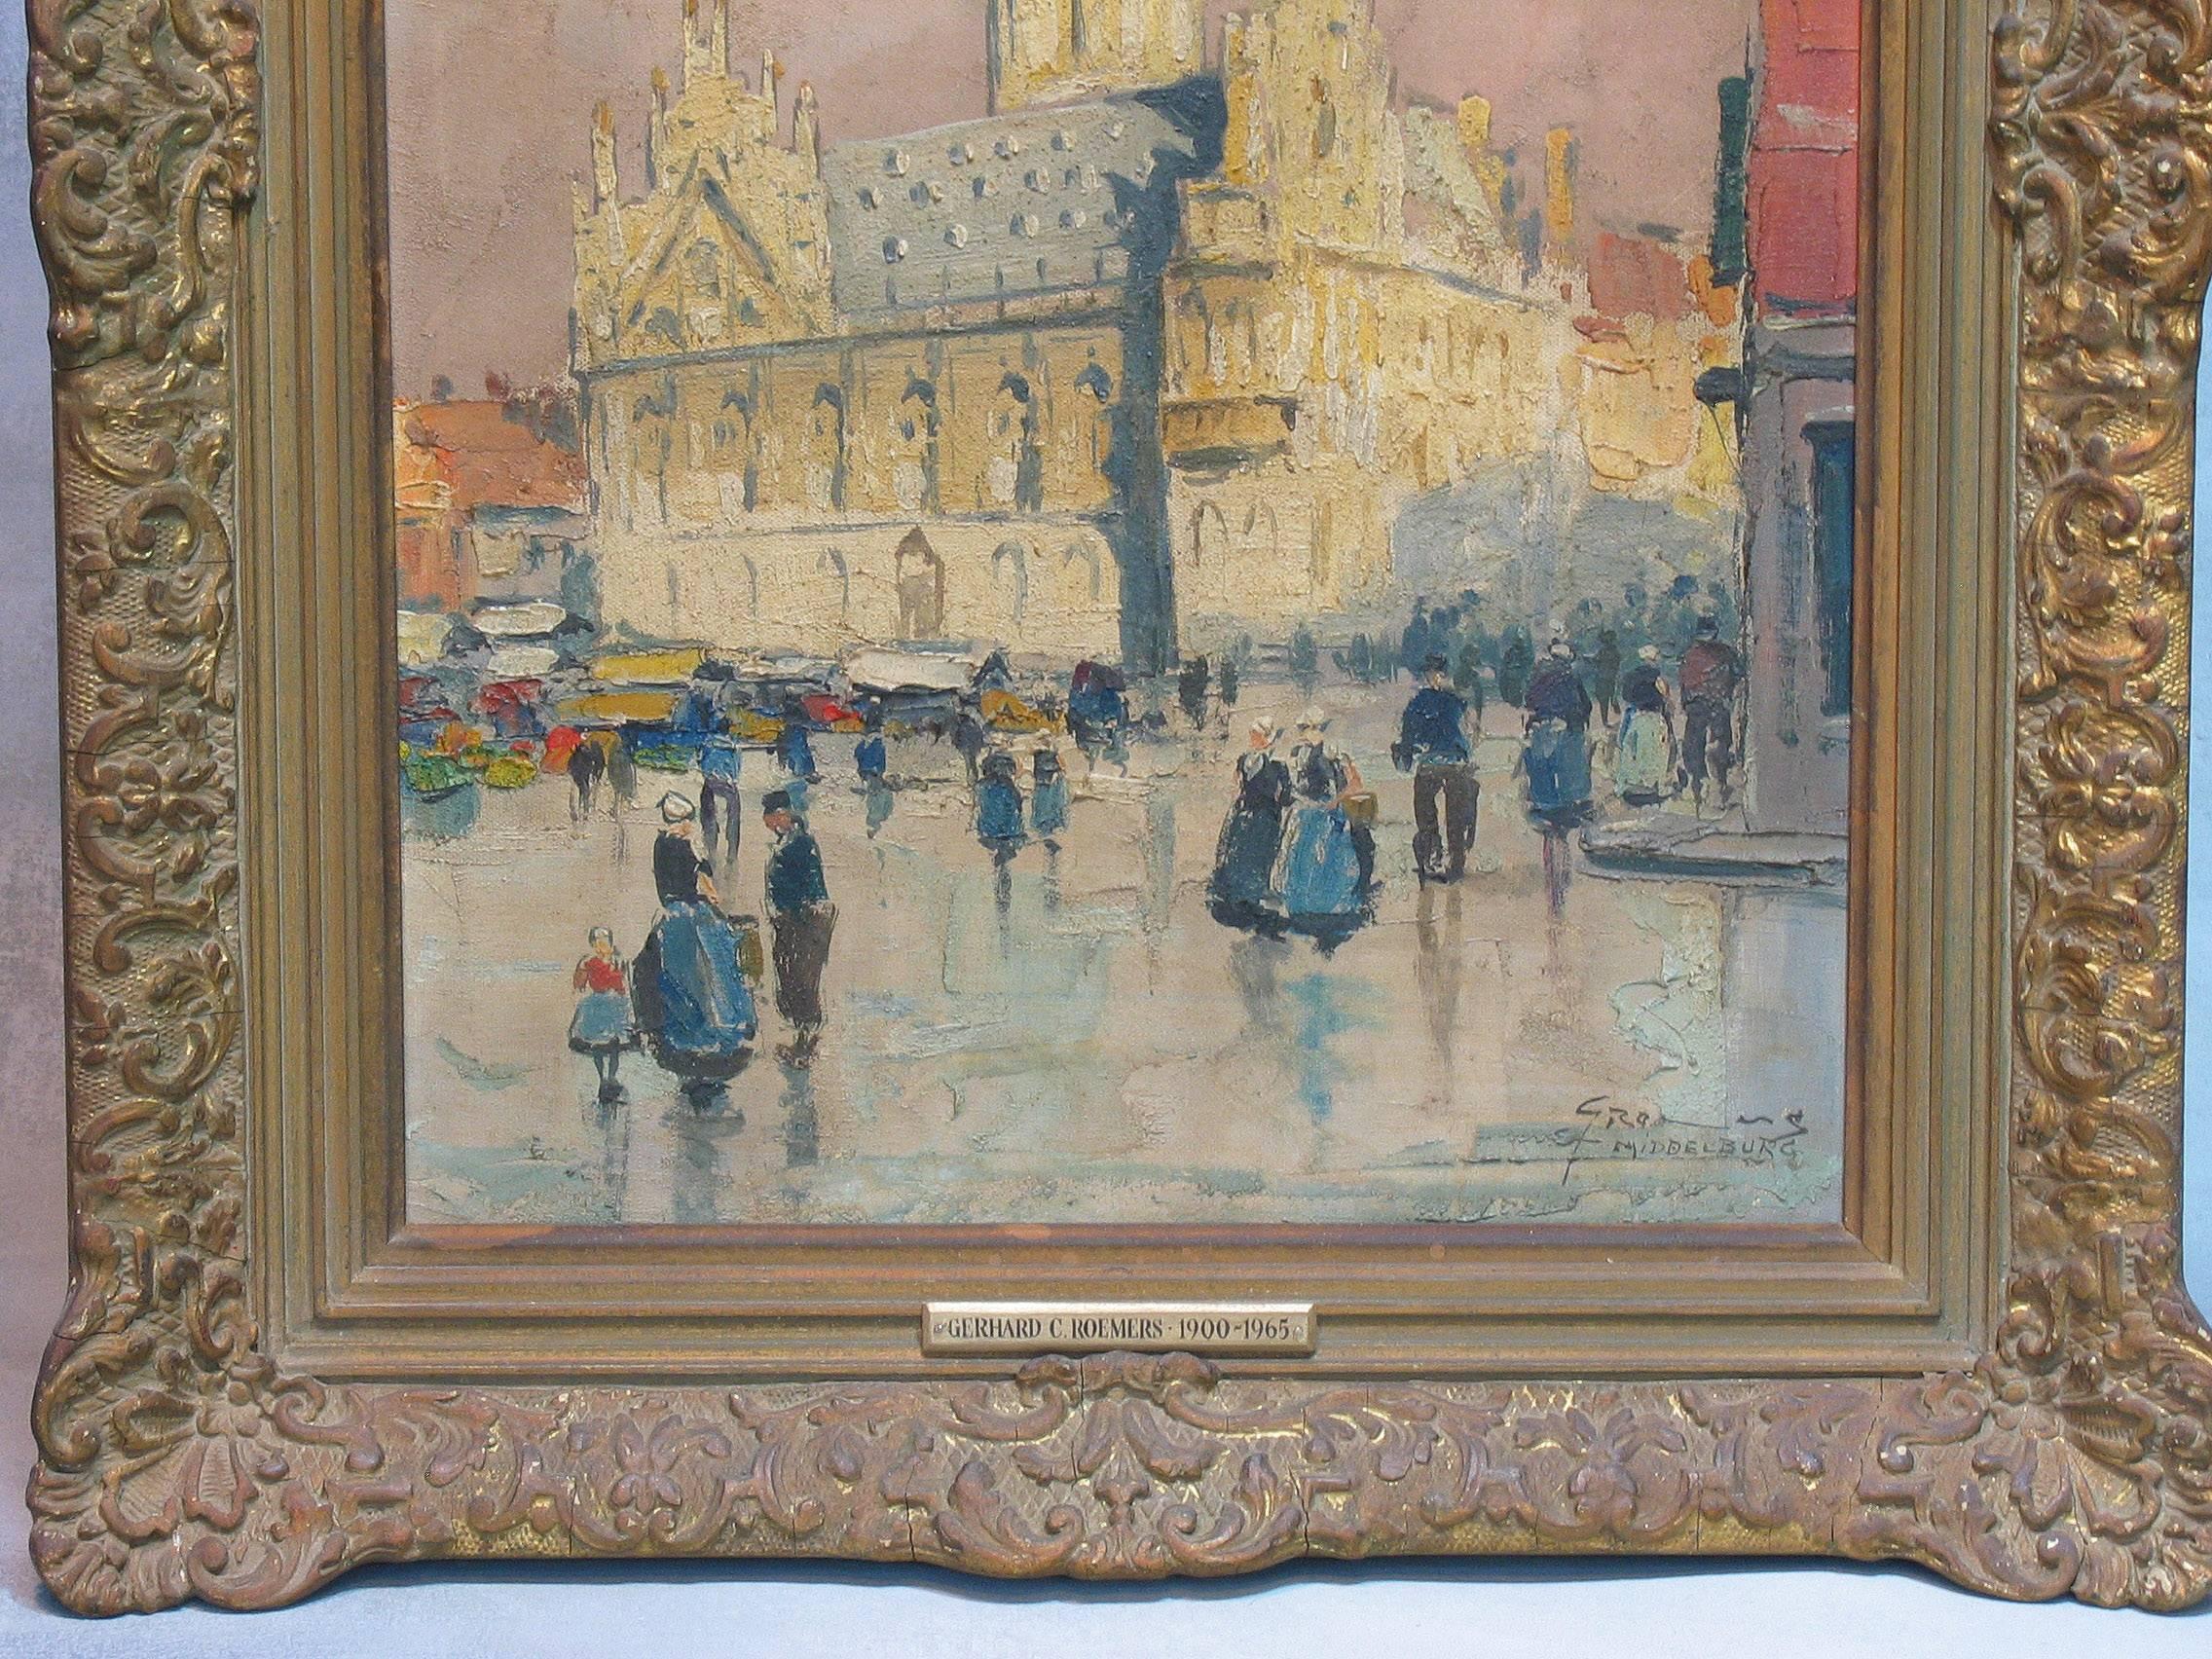 Gerhard Cohn Roemers, Oil on canvas painting (German, 1900-1965), View of Middleburg Town square with Gothic town hall. Signed and titled, lower right, Impressionist work, Executed with a bold impasto technique, Oil on Canvas. The painting measures